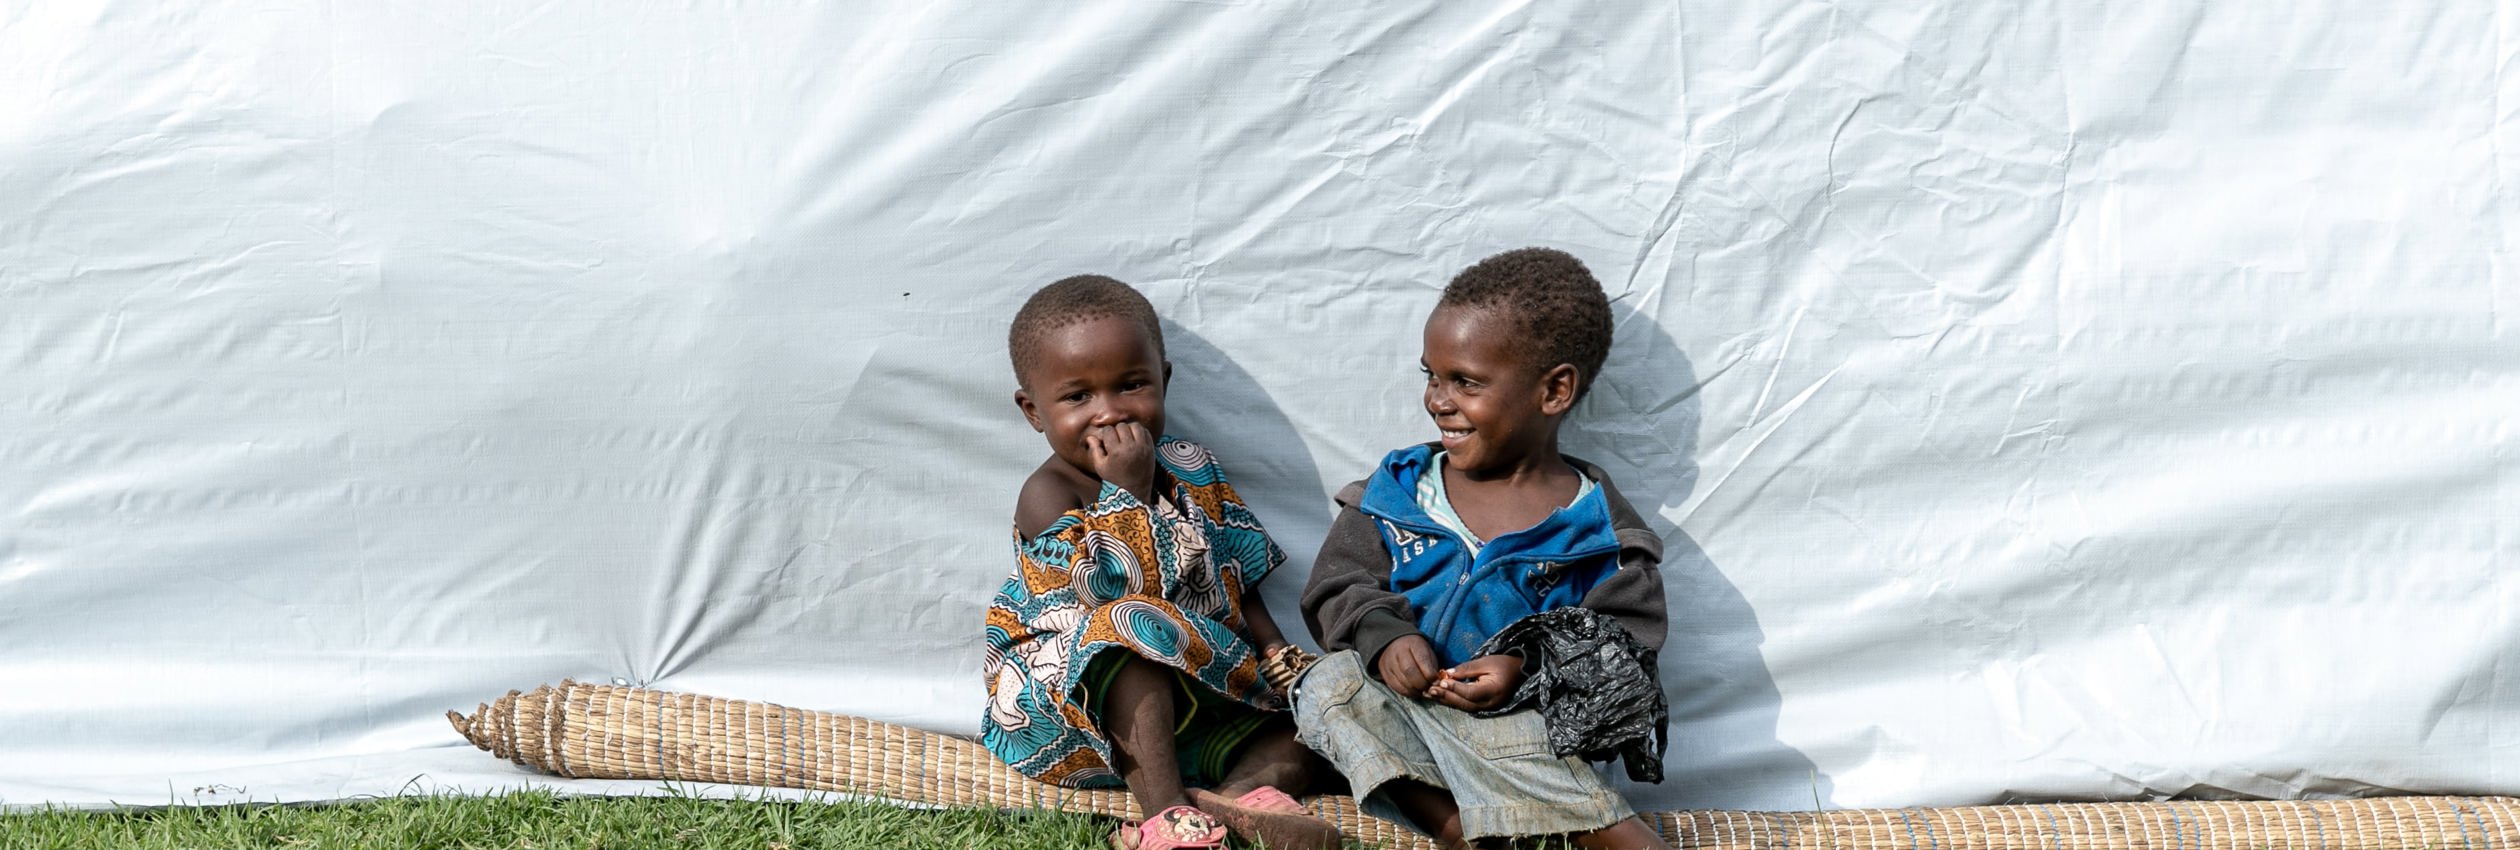 UNHCR provided emergency support for hundreds of Congolese who fled on foot into Rwanda to escape the eruption of the Nyiragongo volcano on 22 May 2021, many separated from their families.